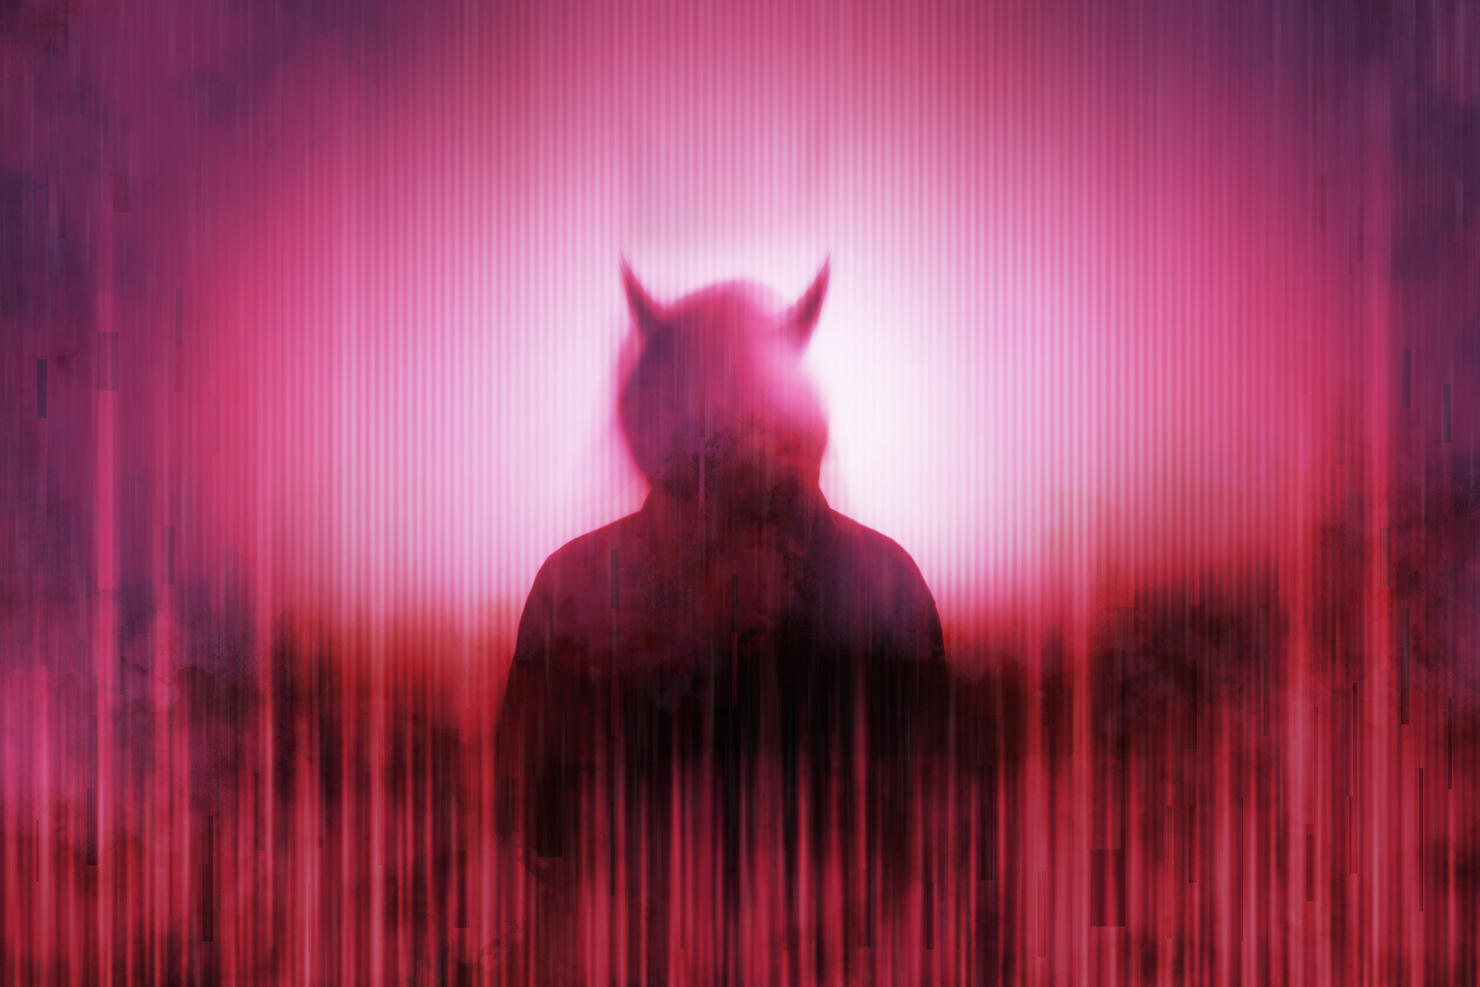 Silhouette of a mysterious horned devil figure without a face, surrounded by a glitch, red, neon edit